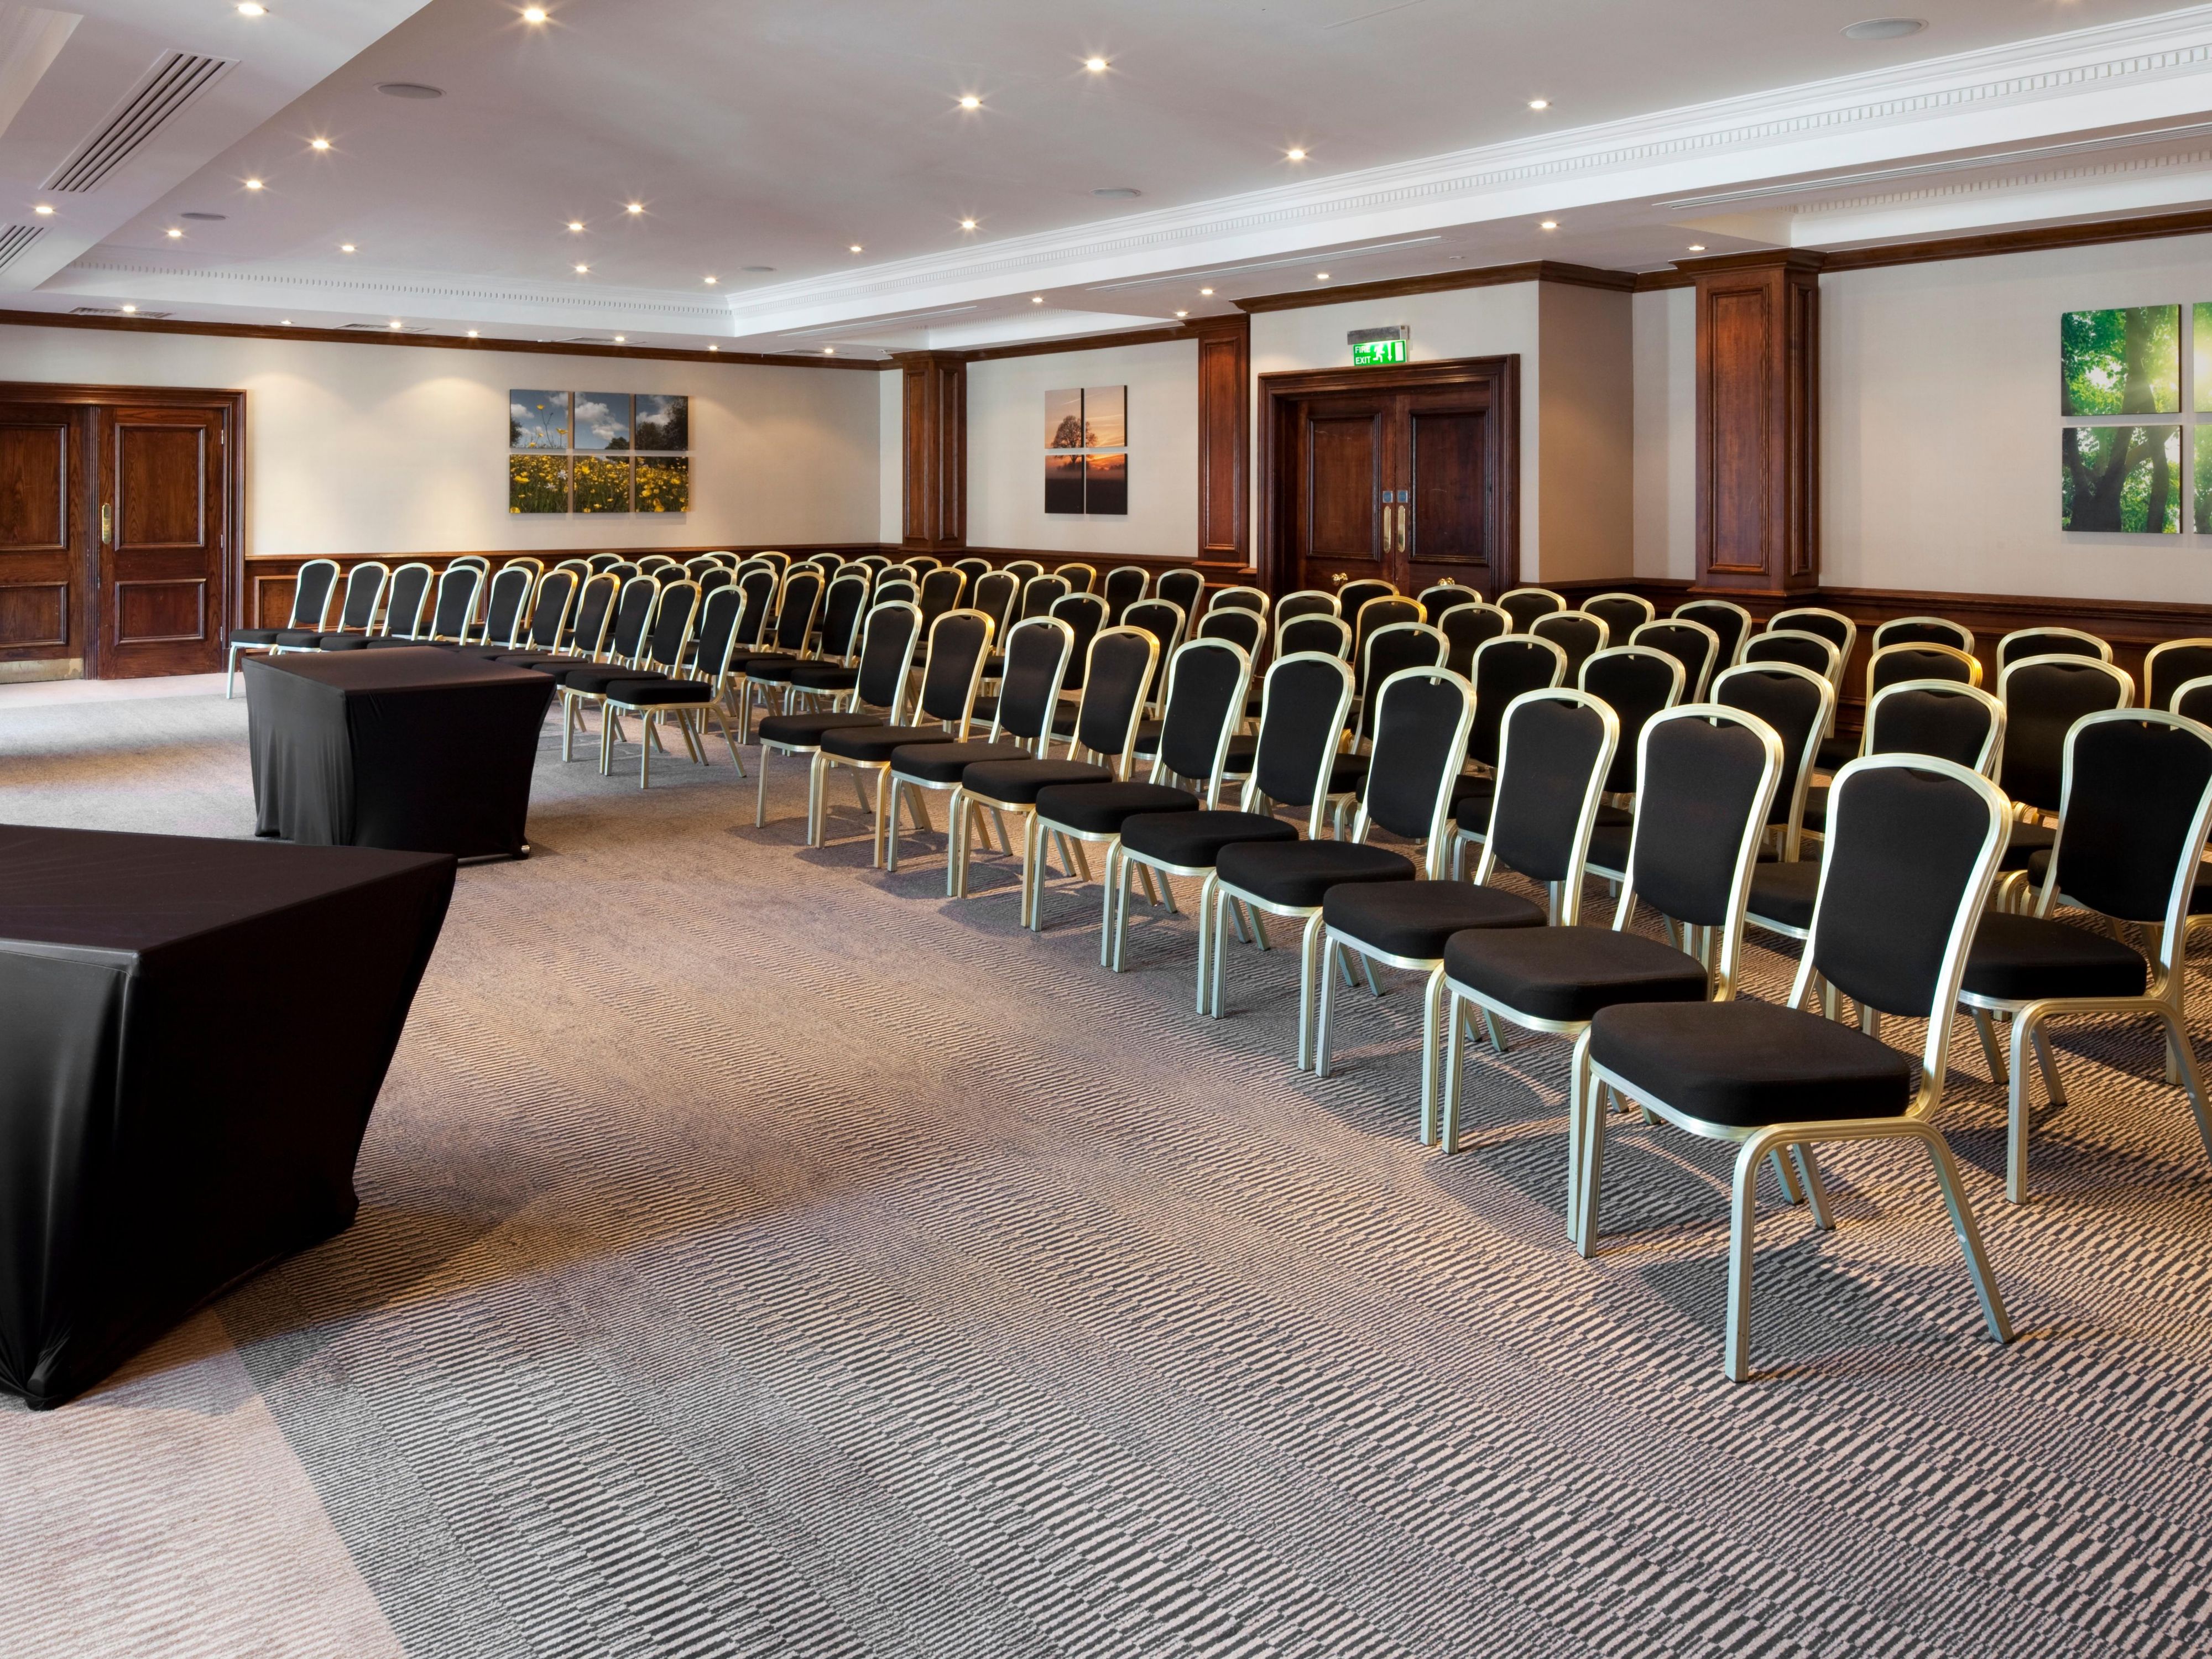 From small board meetings to large conferences or even weddings, our 15 versatile meeting and event rooms can host up to 180 guests and we offer a range of packages to meet your needs. 